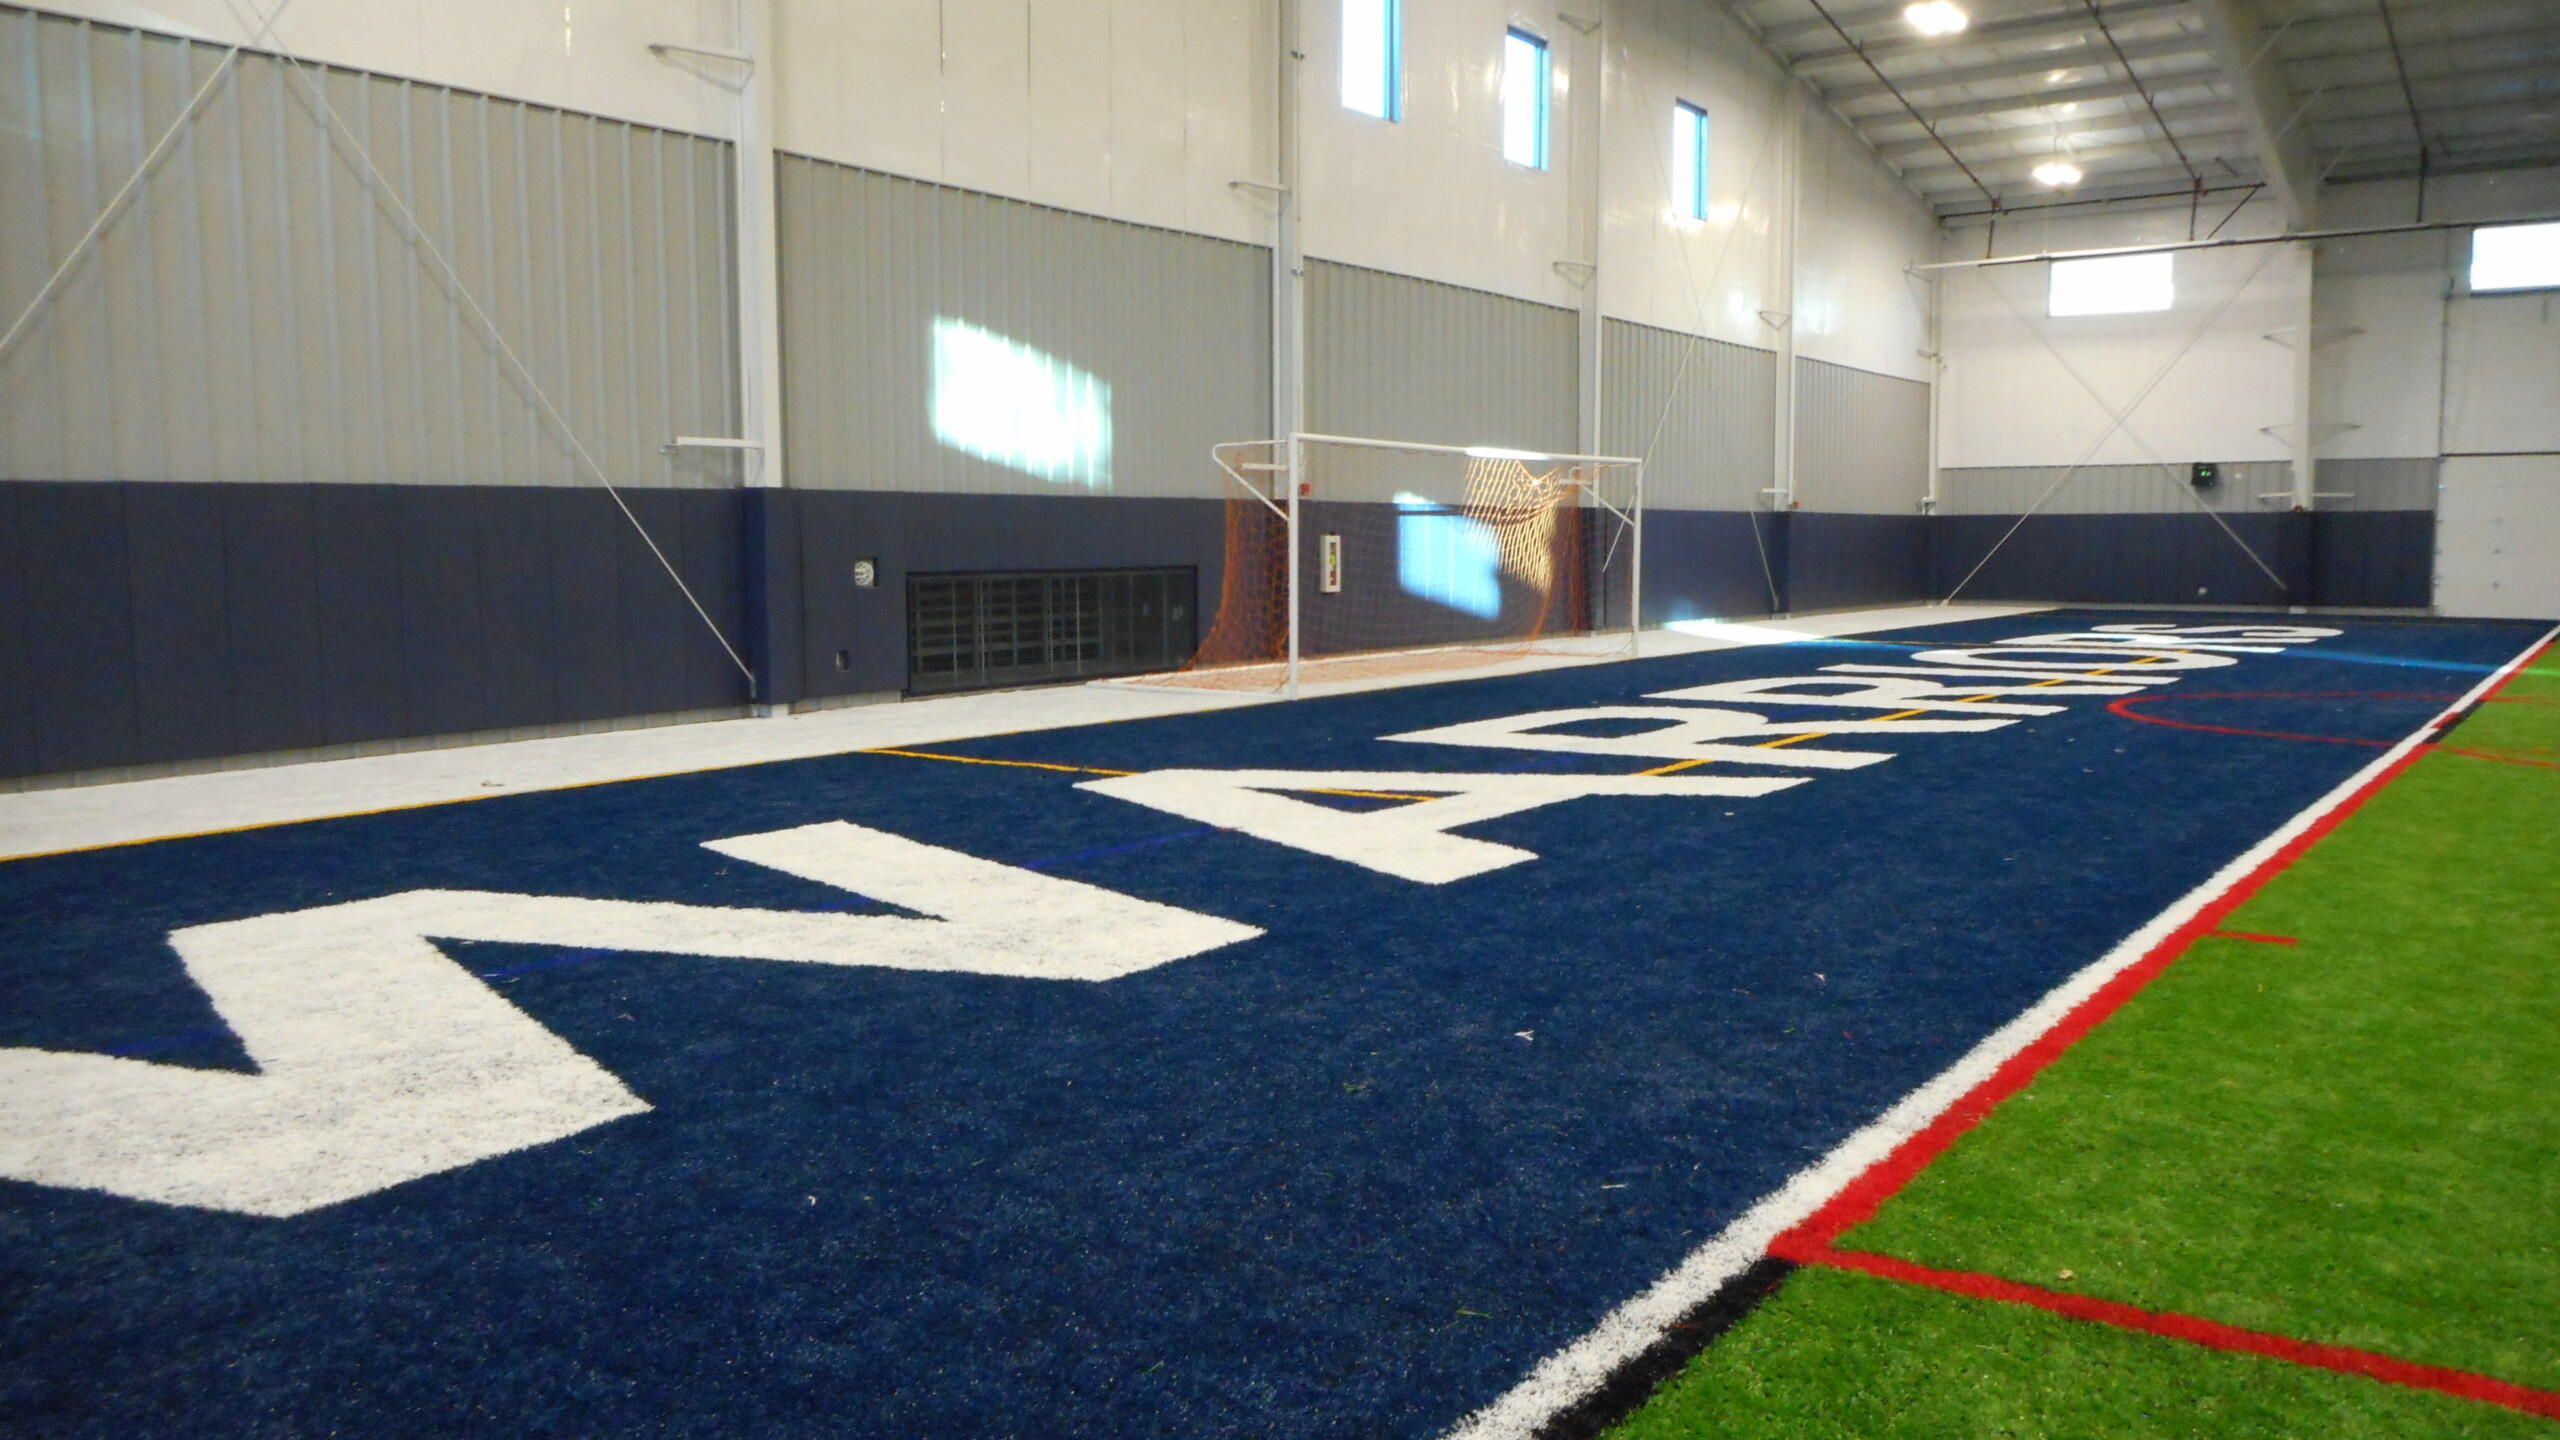 Manasquan Athletic Field House, Monmouth County